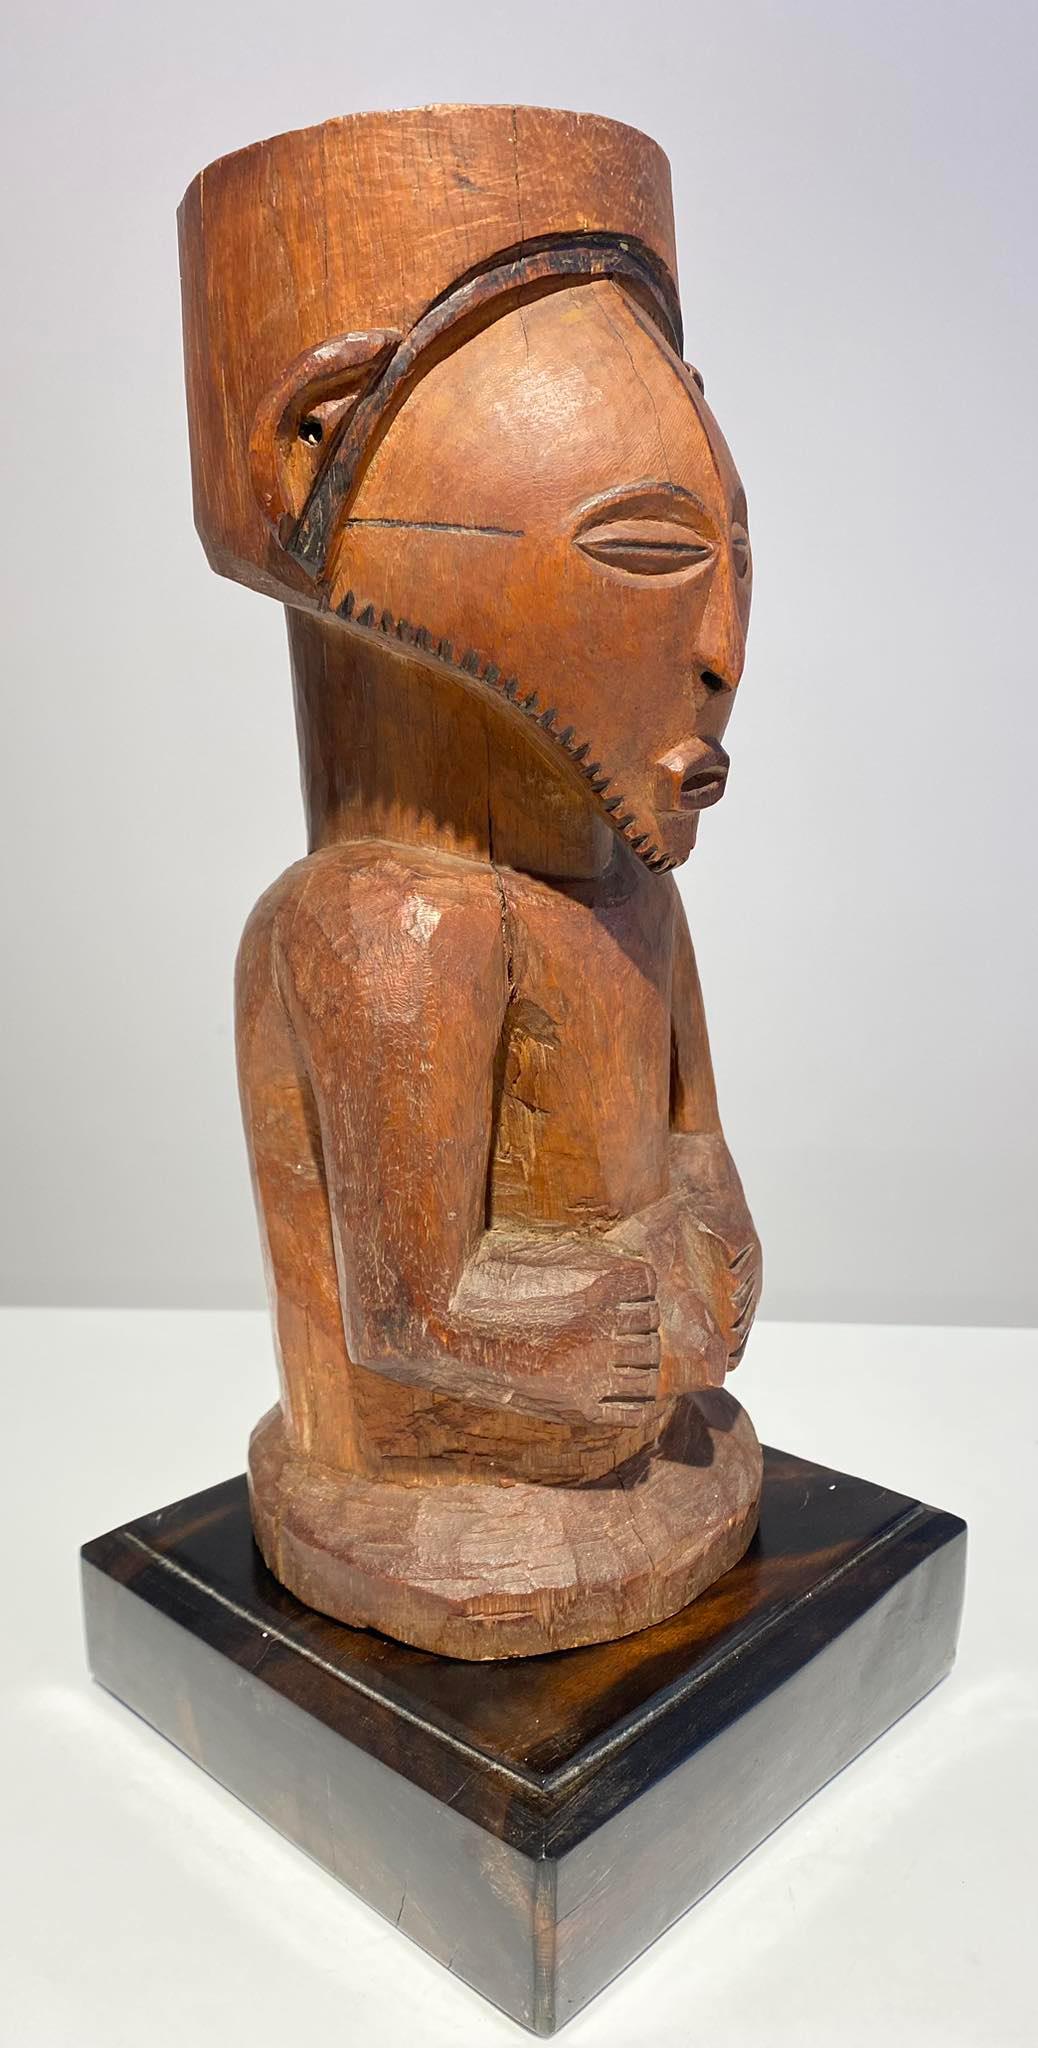 Kusu wooden ancestor fetish ca 1900 DR Congo Africa Central African Tribal Art In Good Condition For Sale In Leuven, BE